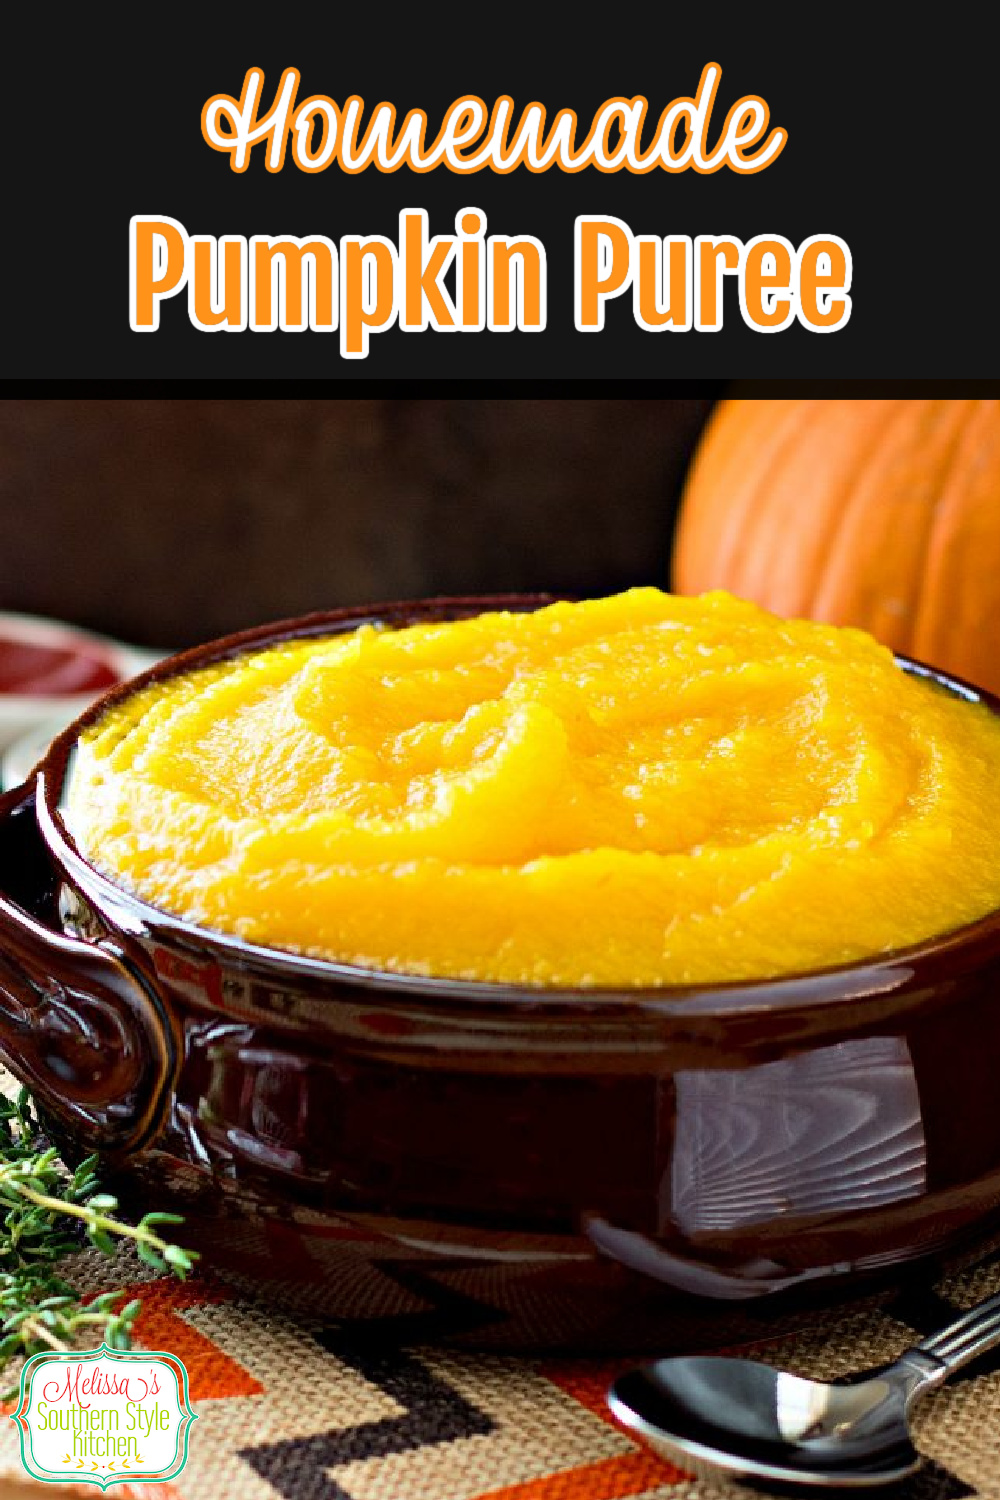 Make your own Homemade Pumpkin Puree to use as an ingredient for pies, breads, cakes and all of your fall baking projects #pumpkinpuree #diypumpkinpuree #pumpkins #roastpumpkin #fallbaking #easyrecipes #homemadepumpkinpuree #pumpkin pie #pumpkinbread #pumpkindesserts #southernrecipes #southernfood #thanksgiving #holidaybaking